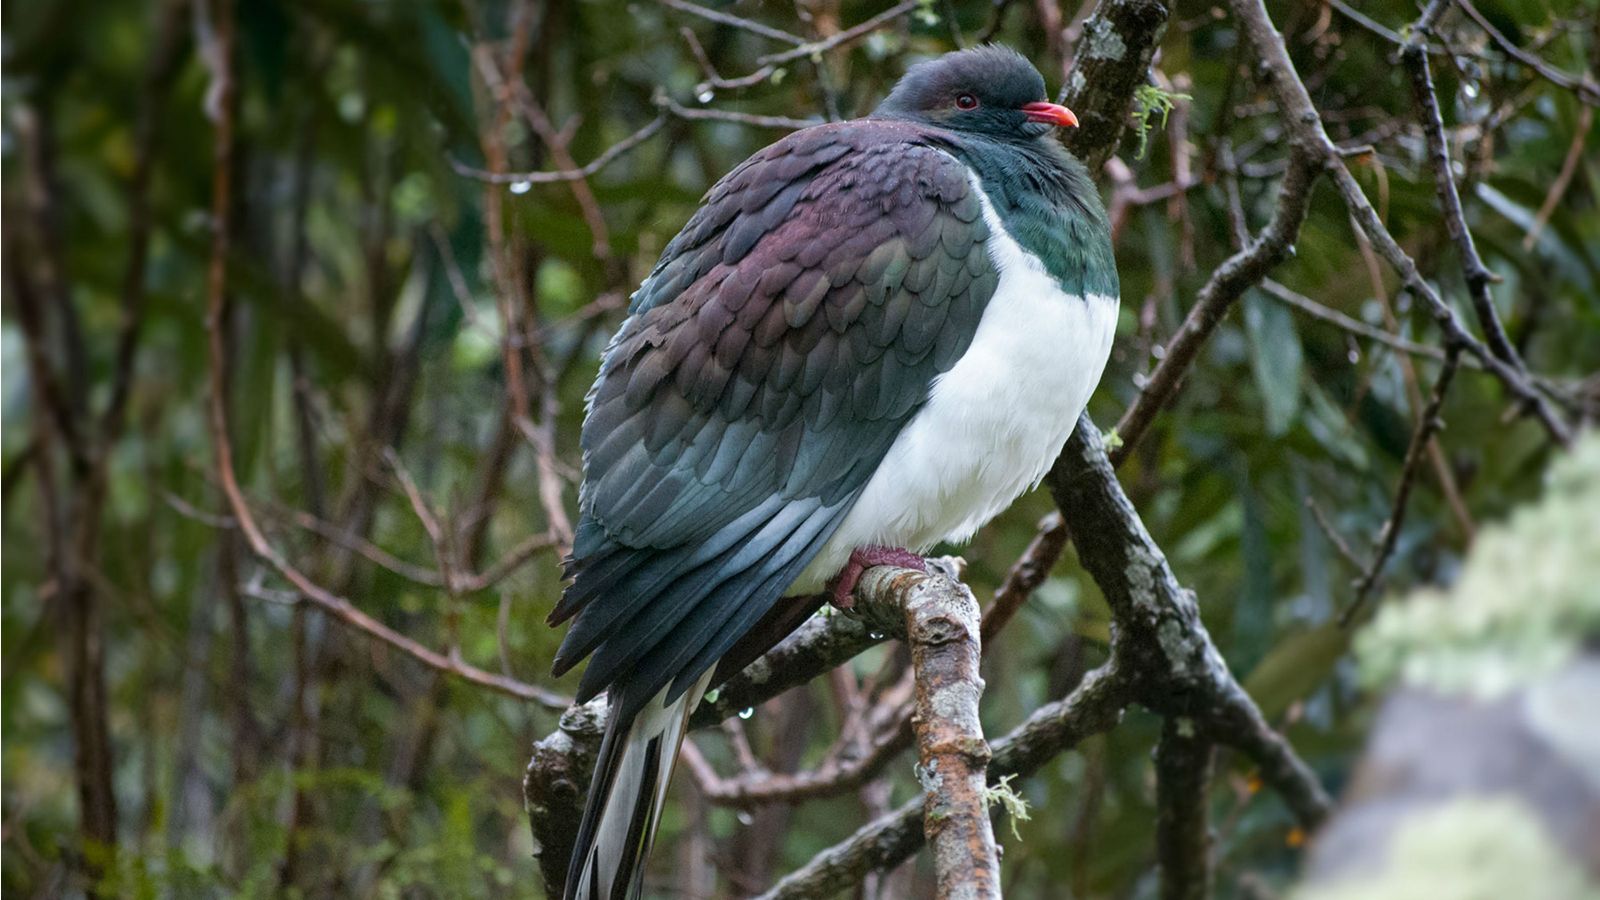 A native New Zealand pigeon (kererū) sits on a branch surrounded by forest.